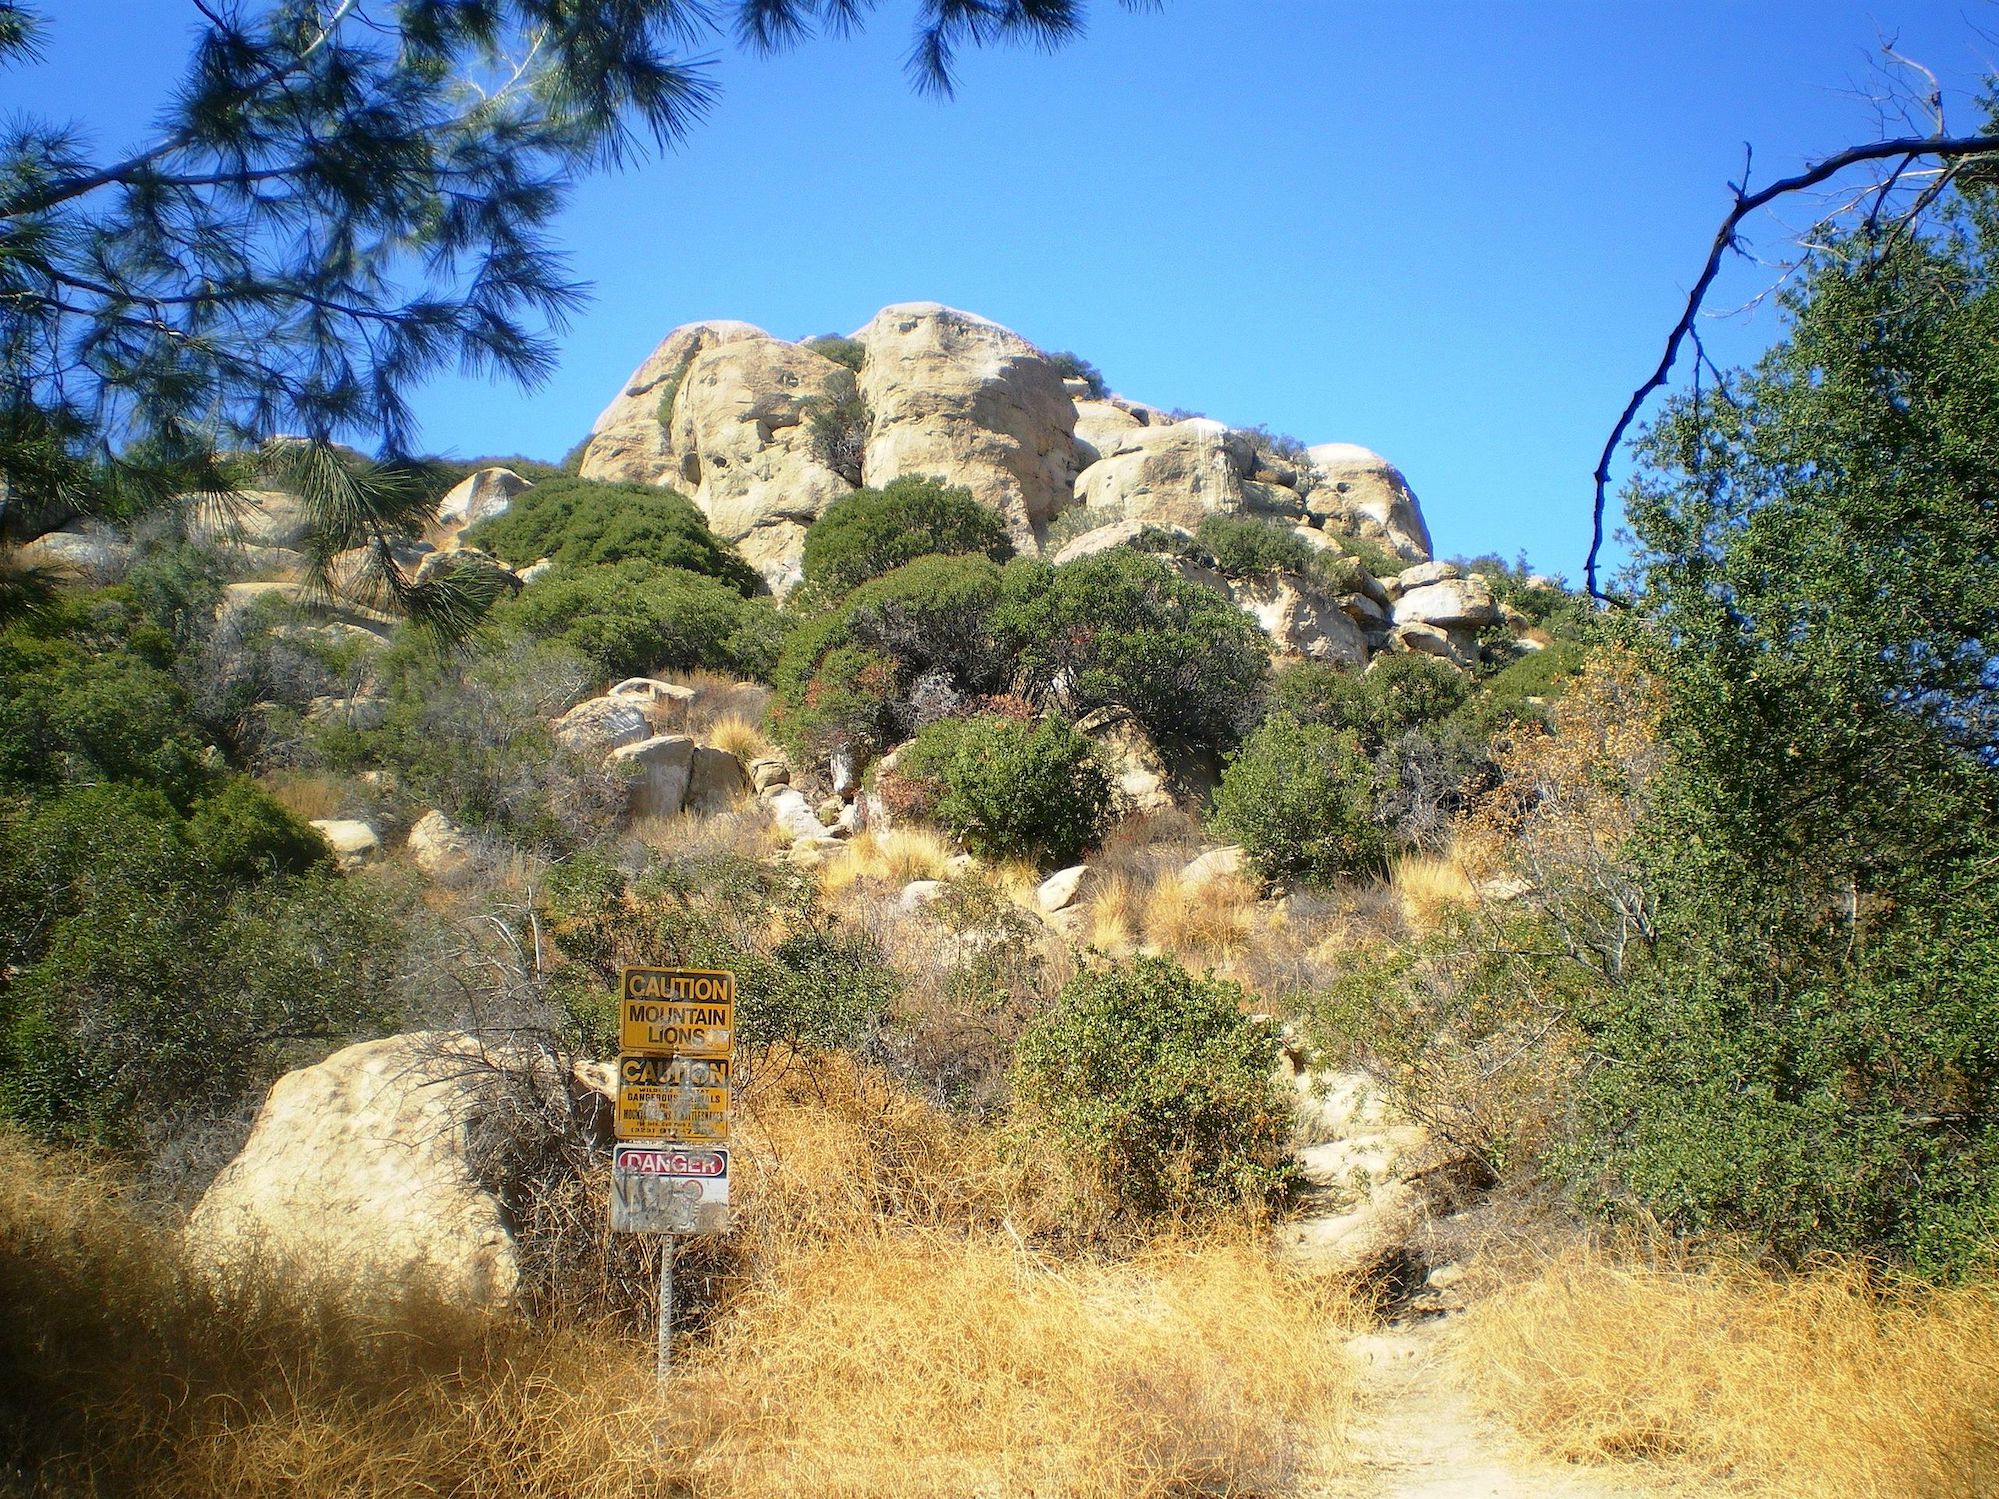 Trail with shrubbery and trees with large rock formation coming up through the trees